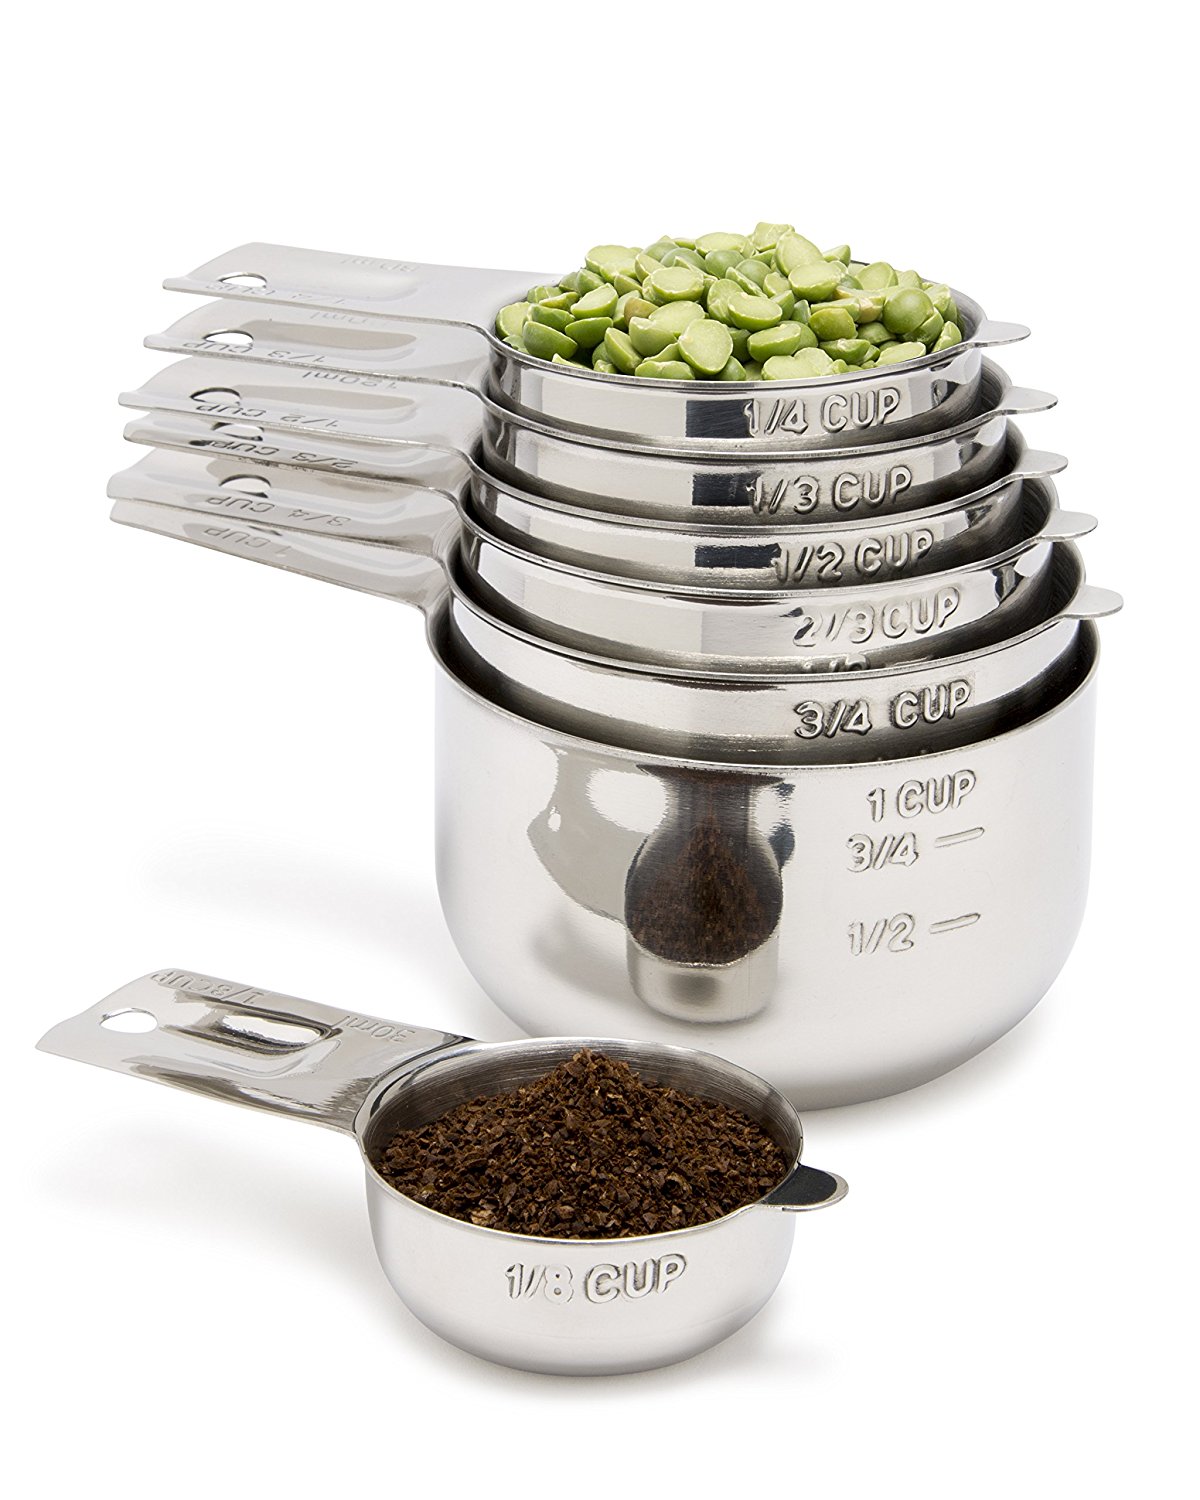 Measuring Cups 7 Piece with 1/8 Cup Coffee Scoop by . Stainless Steel Measuring Cup Set. Liquid Measuring Cup or Dry Measuring Cup. Stainless Measuring Cups with Nesting Cups Feature - image 1 of 6